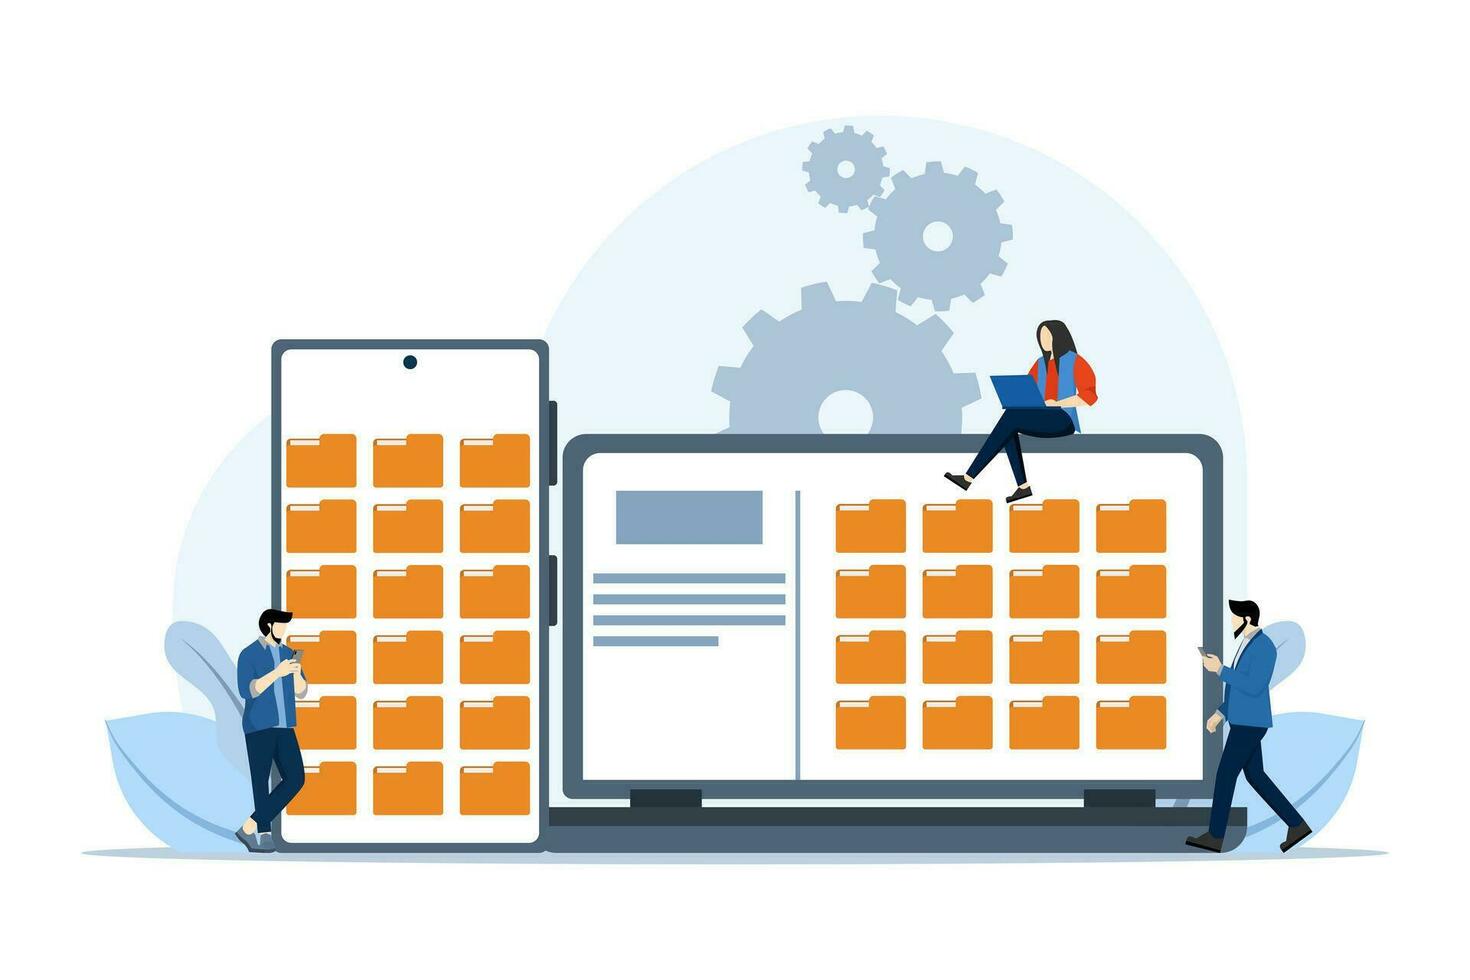 File management concept, Data storage, Folders, documents and media content, Business team looking for files on smart phone or laptop, Modern flat cartoon style, Vector illustration on background.